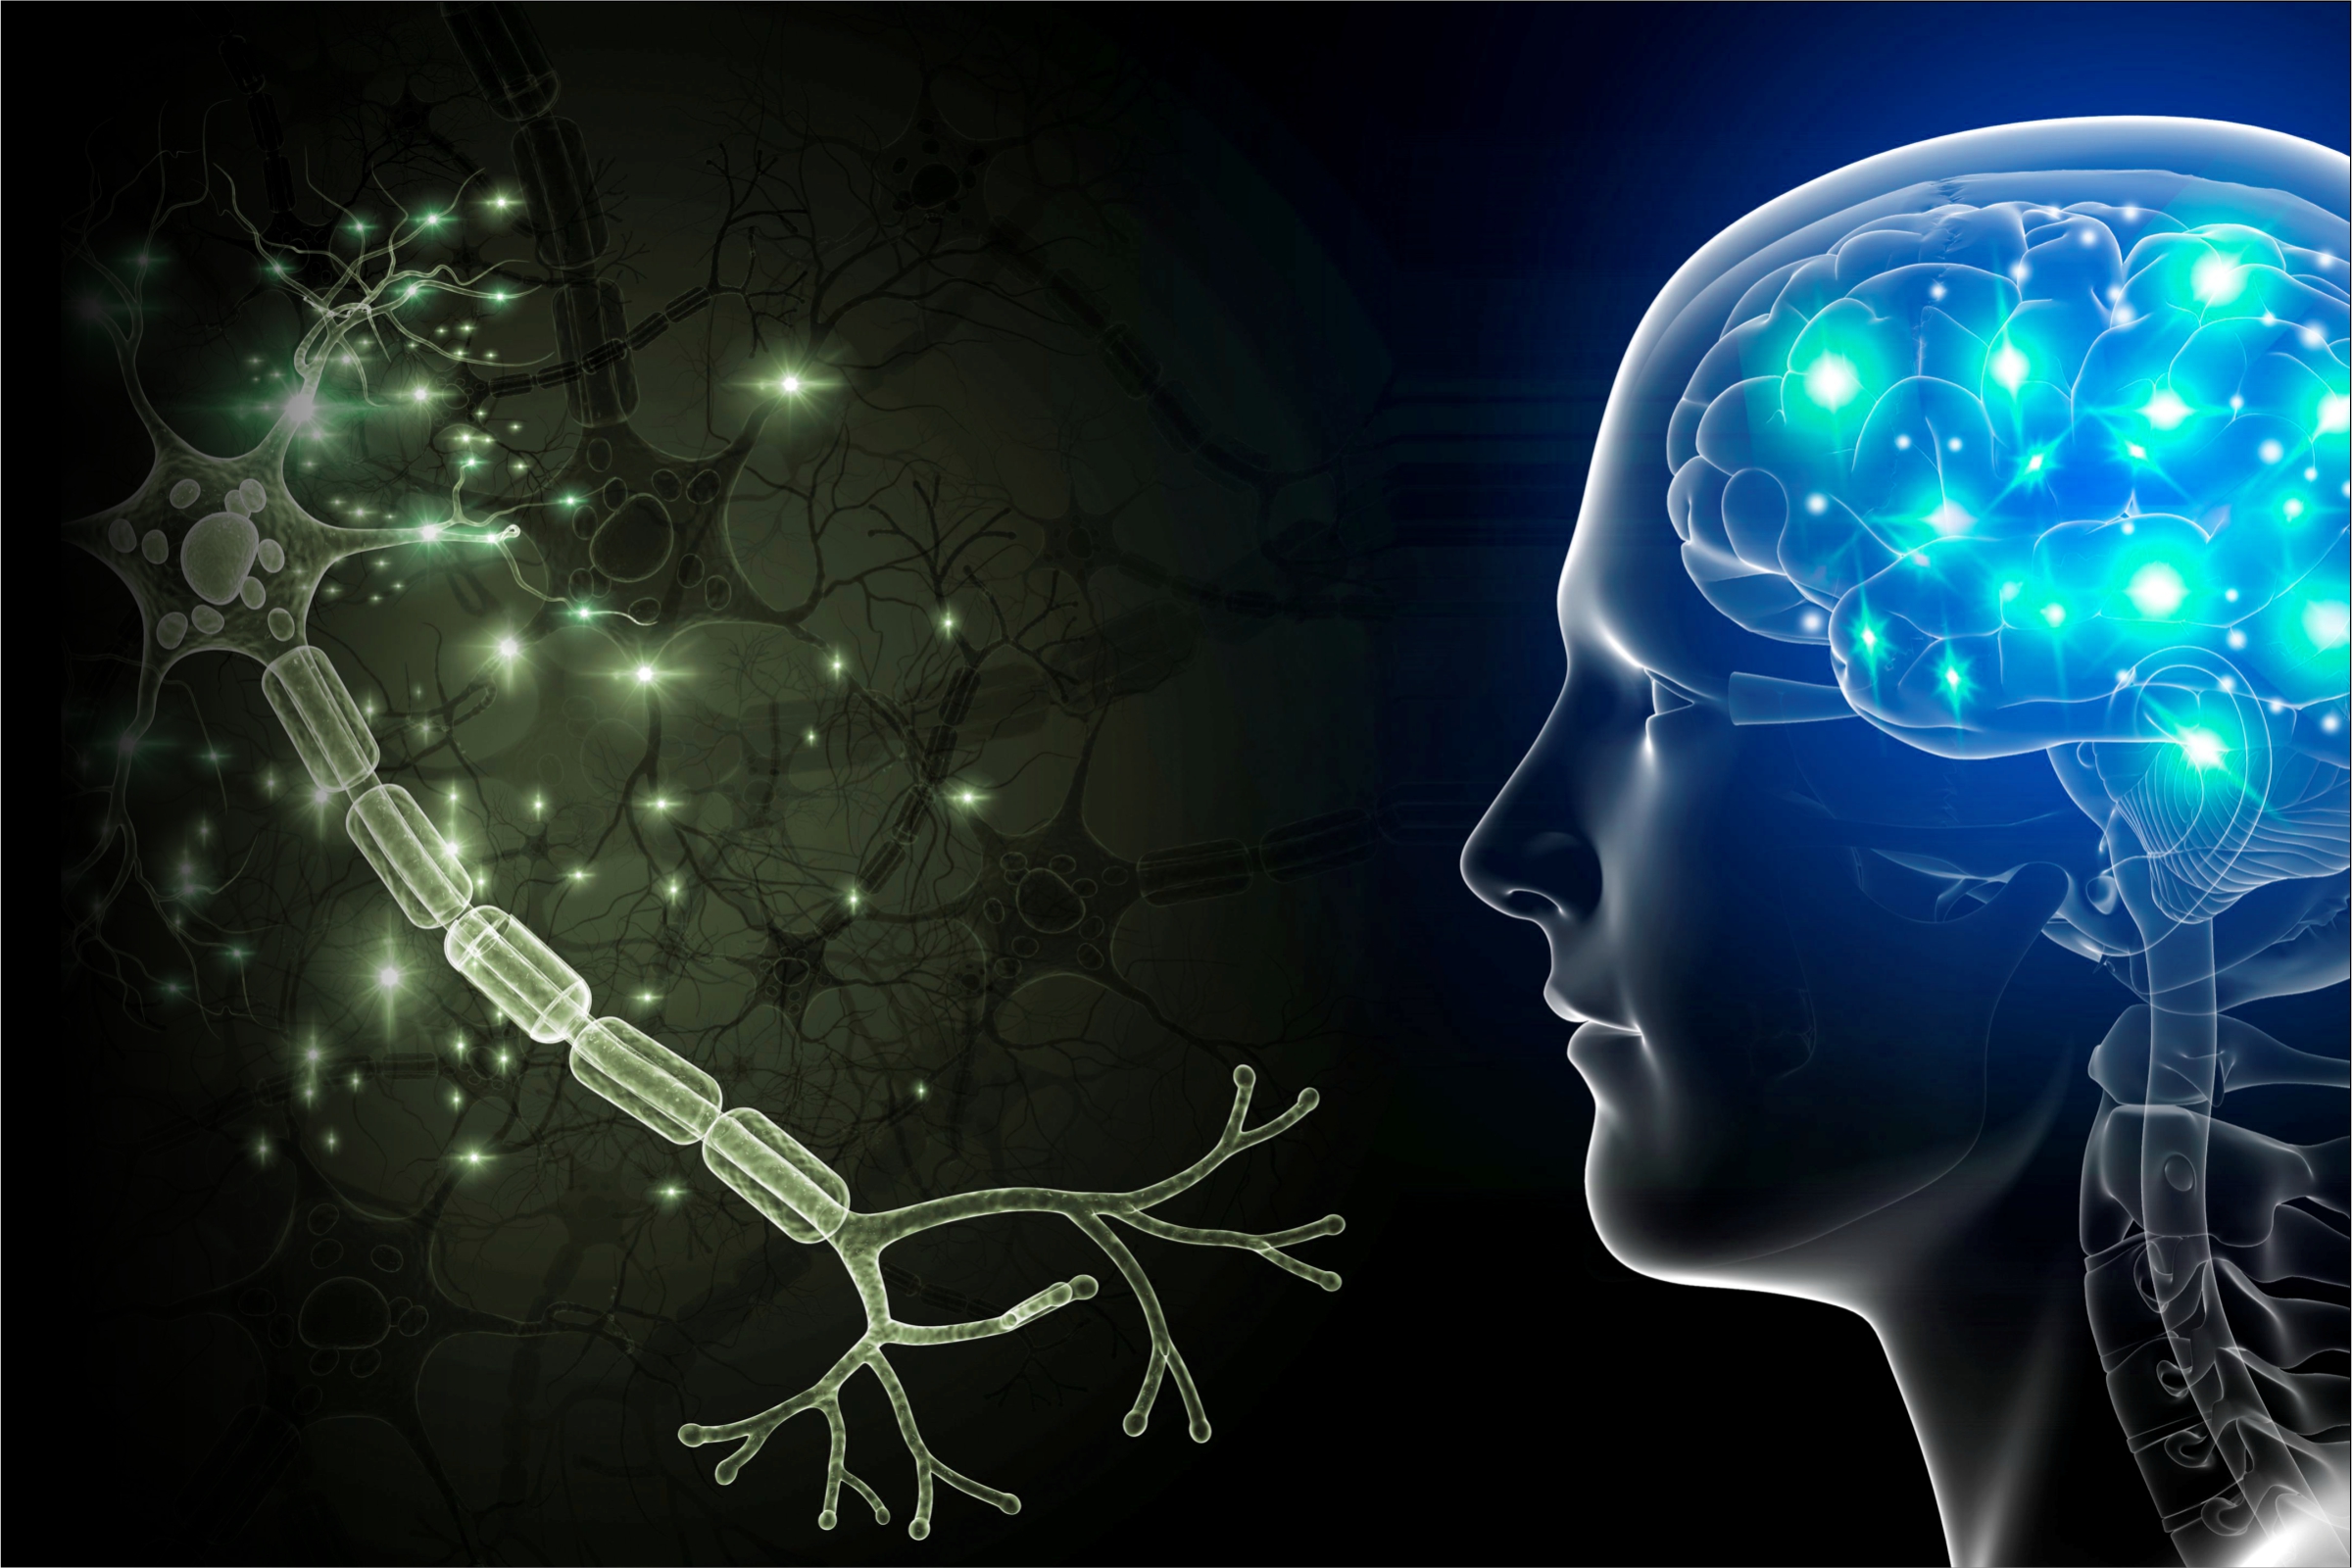 What’s the difference between “brain cells” and “neurons”?